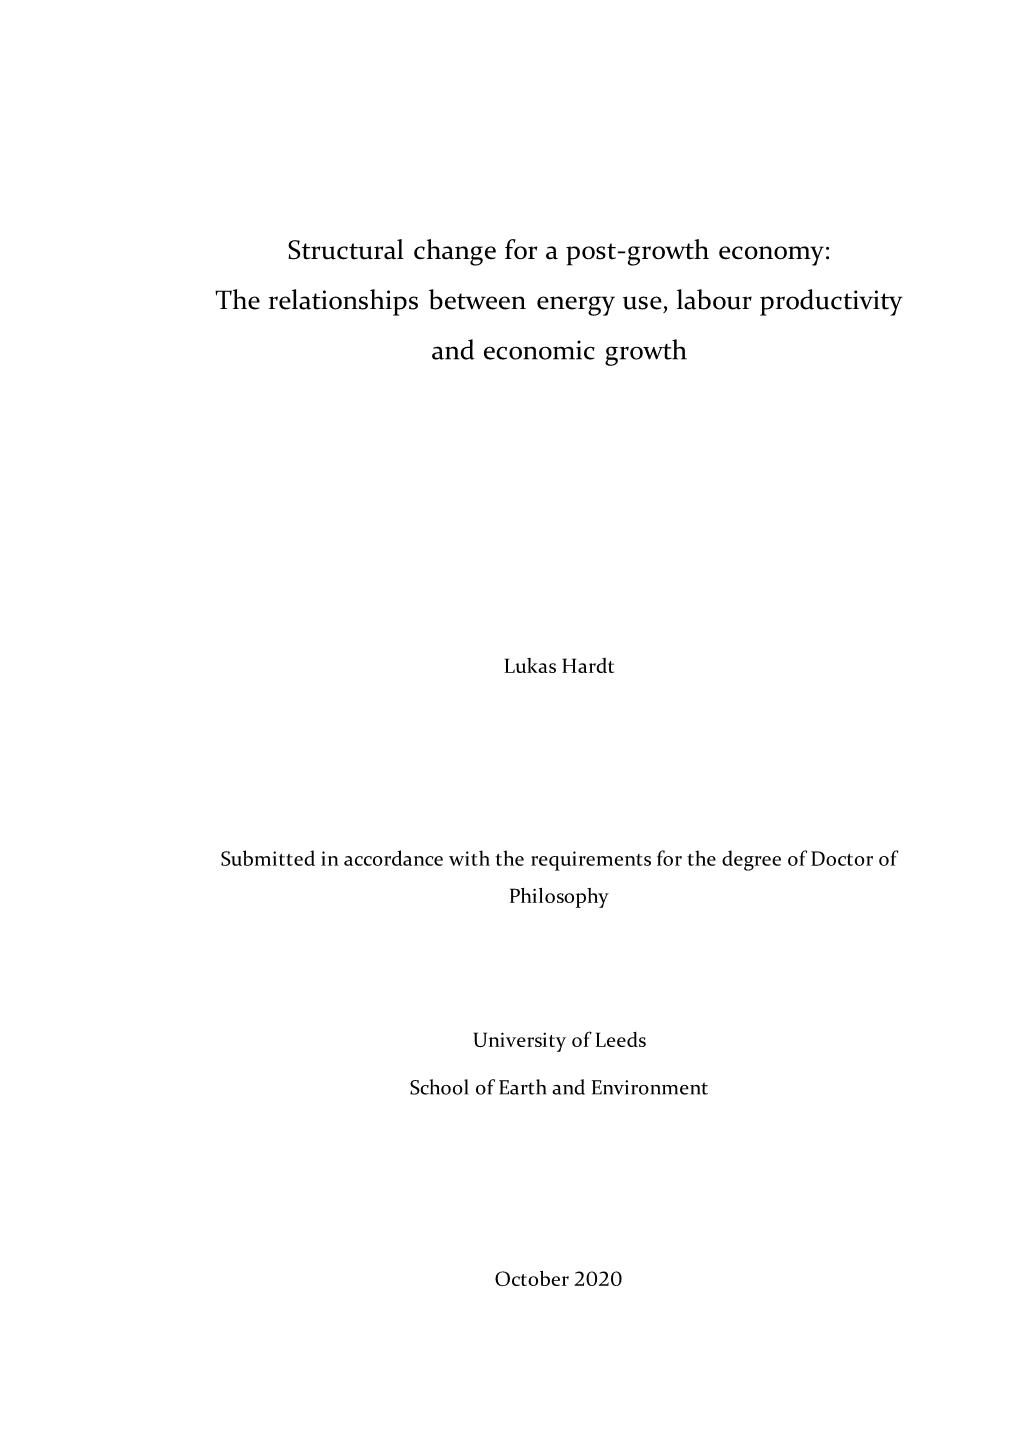 Structural Change for a Post-Growth Economy: the Relationships Between Energy Use, Labour Productivity and Economic Growth